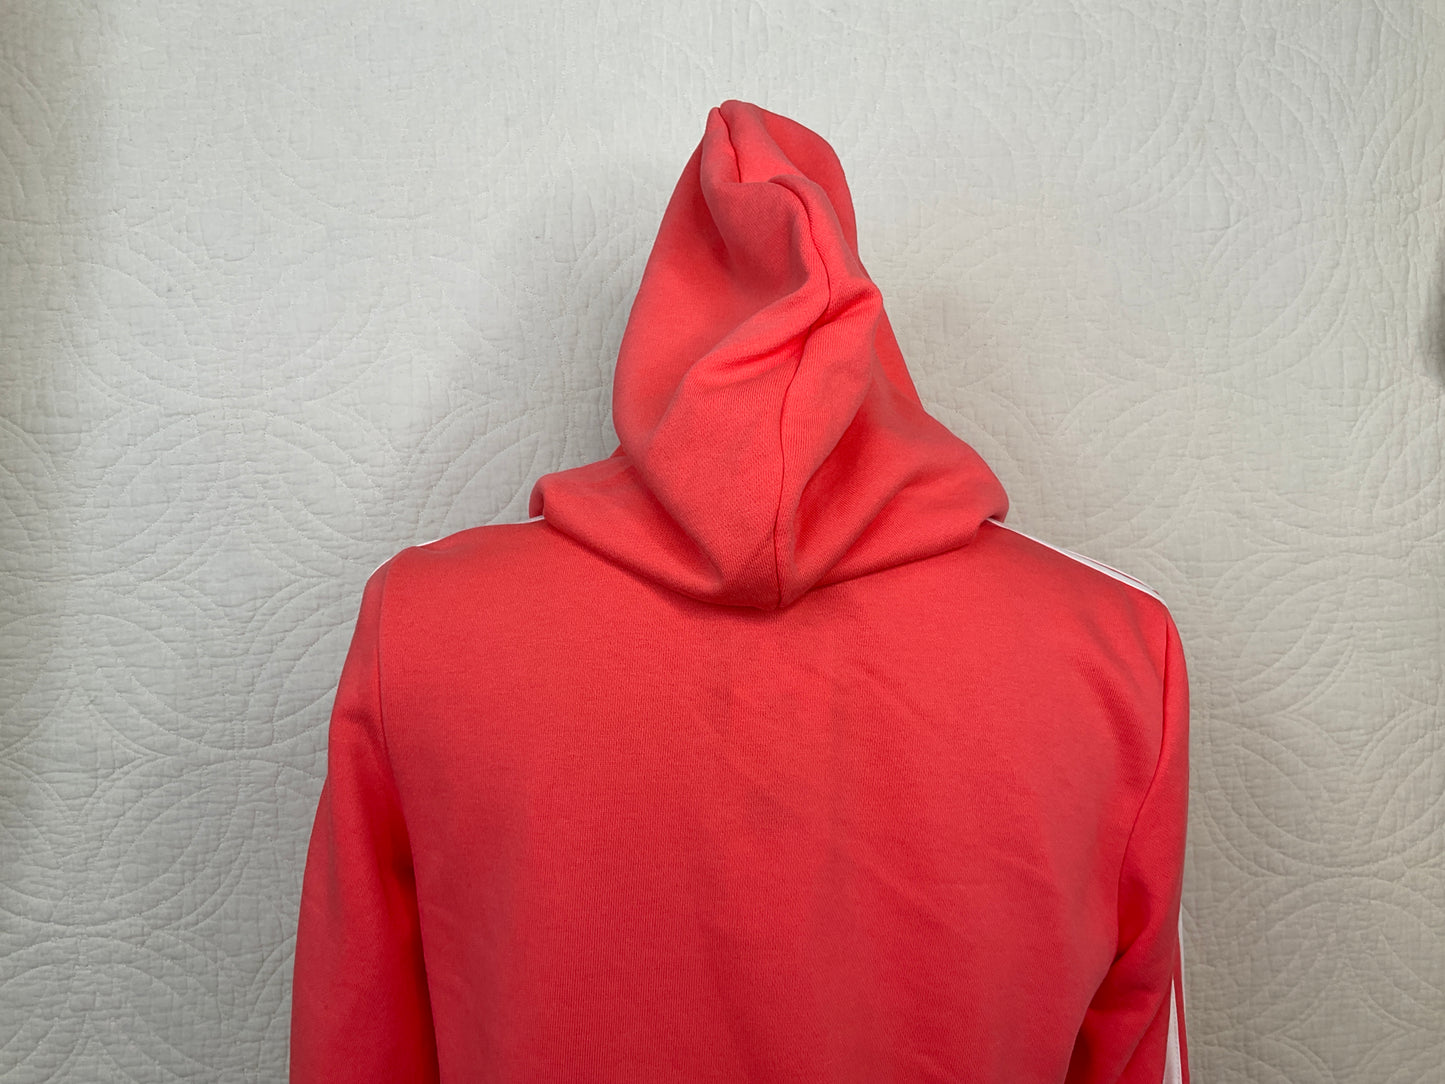 NEW Adidas Classics Cropped Hoodie, XS